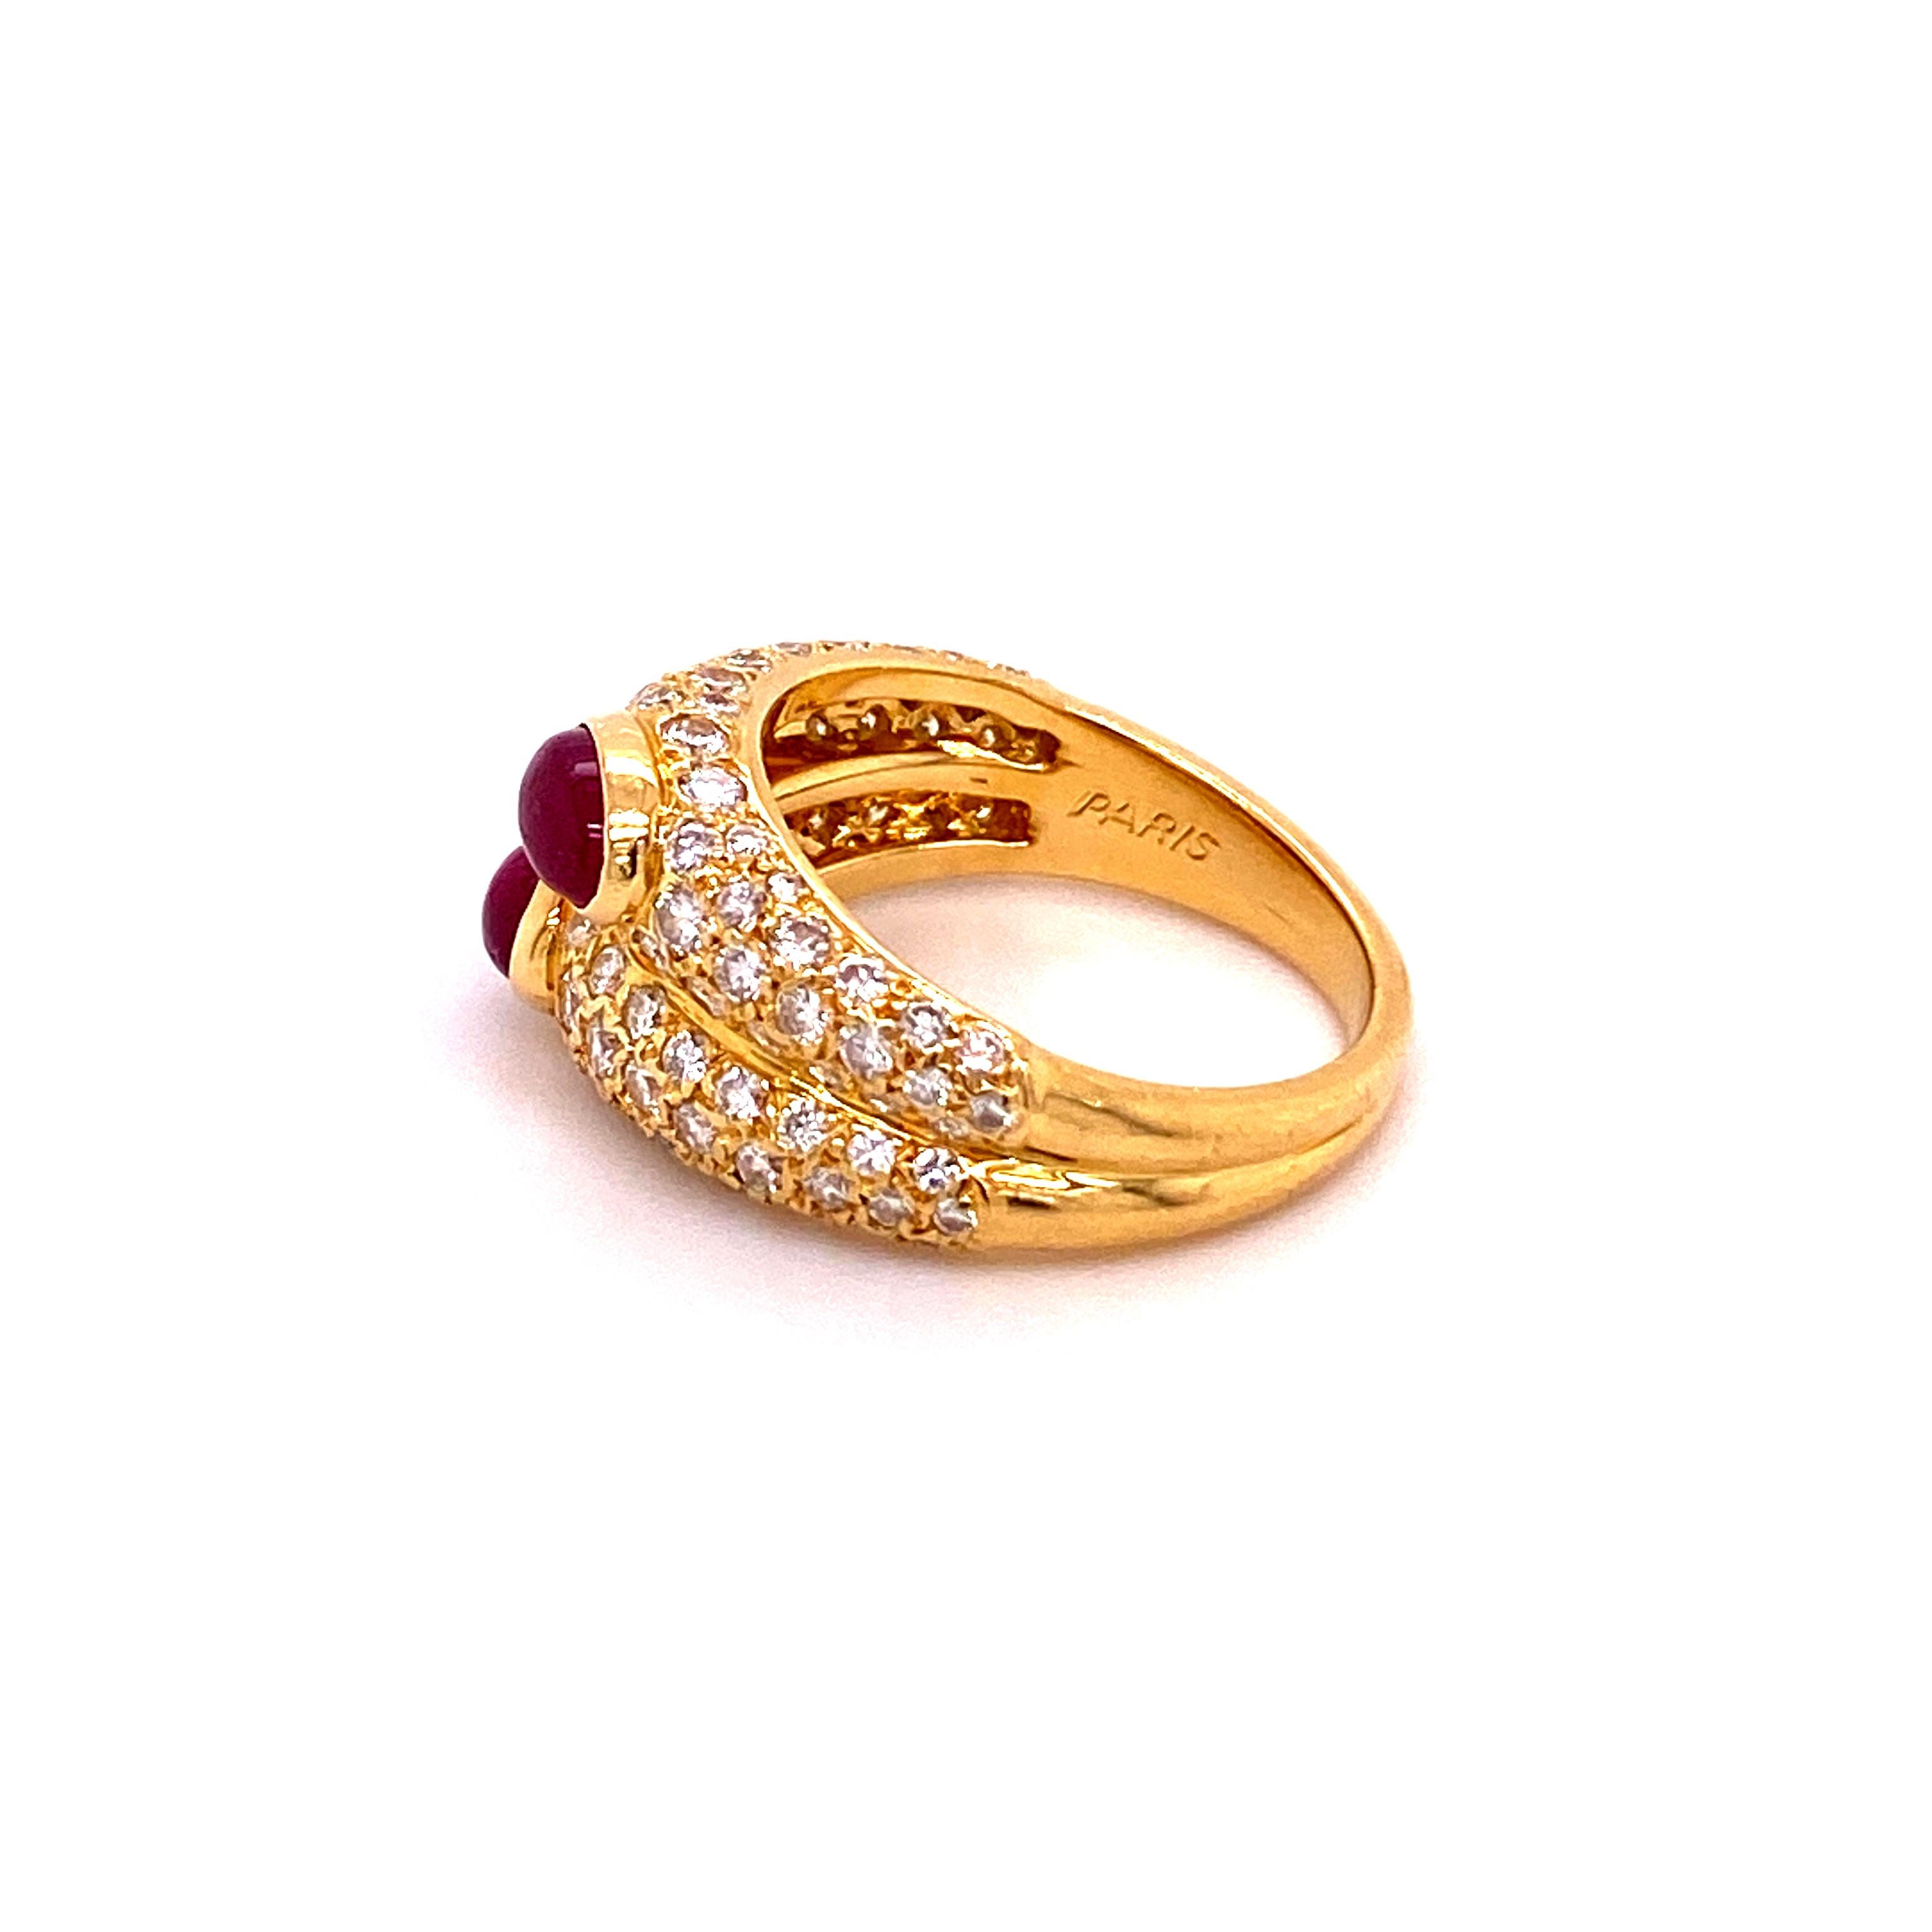 Women's or Men's Cartier Ruby and Diamond Ring in 18 Karat Yellow Gold